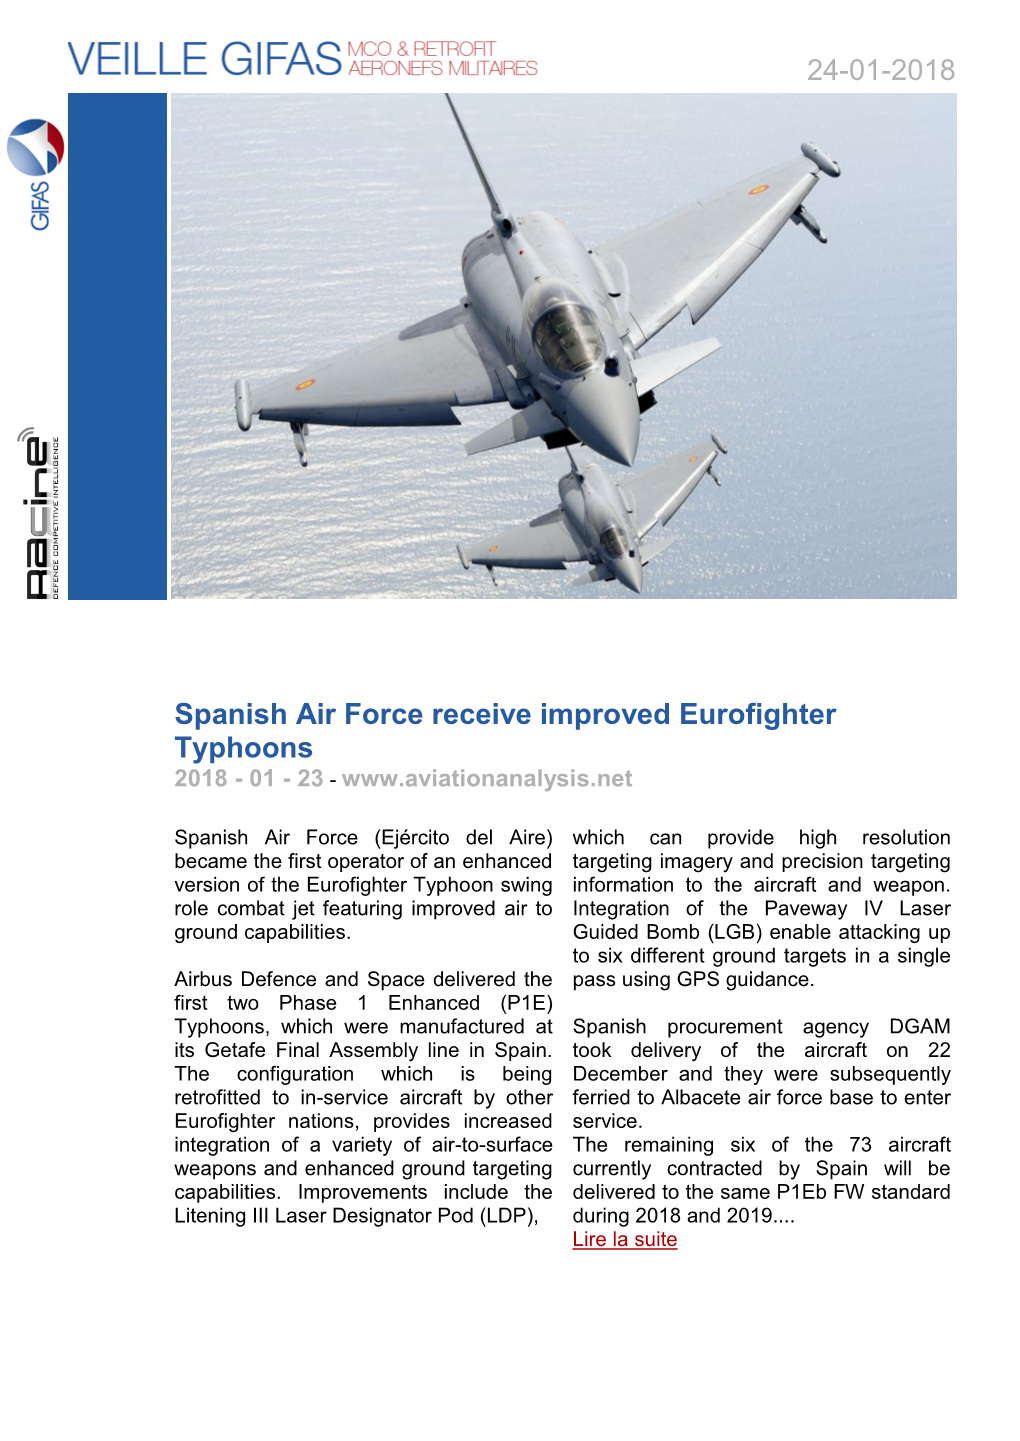 24-01-2018 Spanish Air Force Receive Improved Eurofighter Typhoons